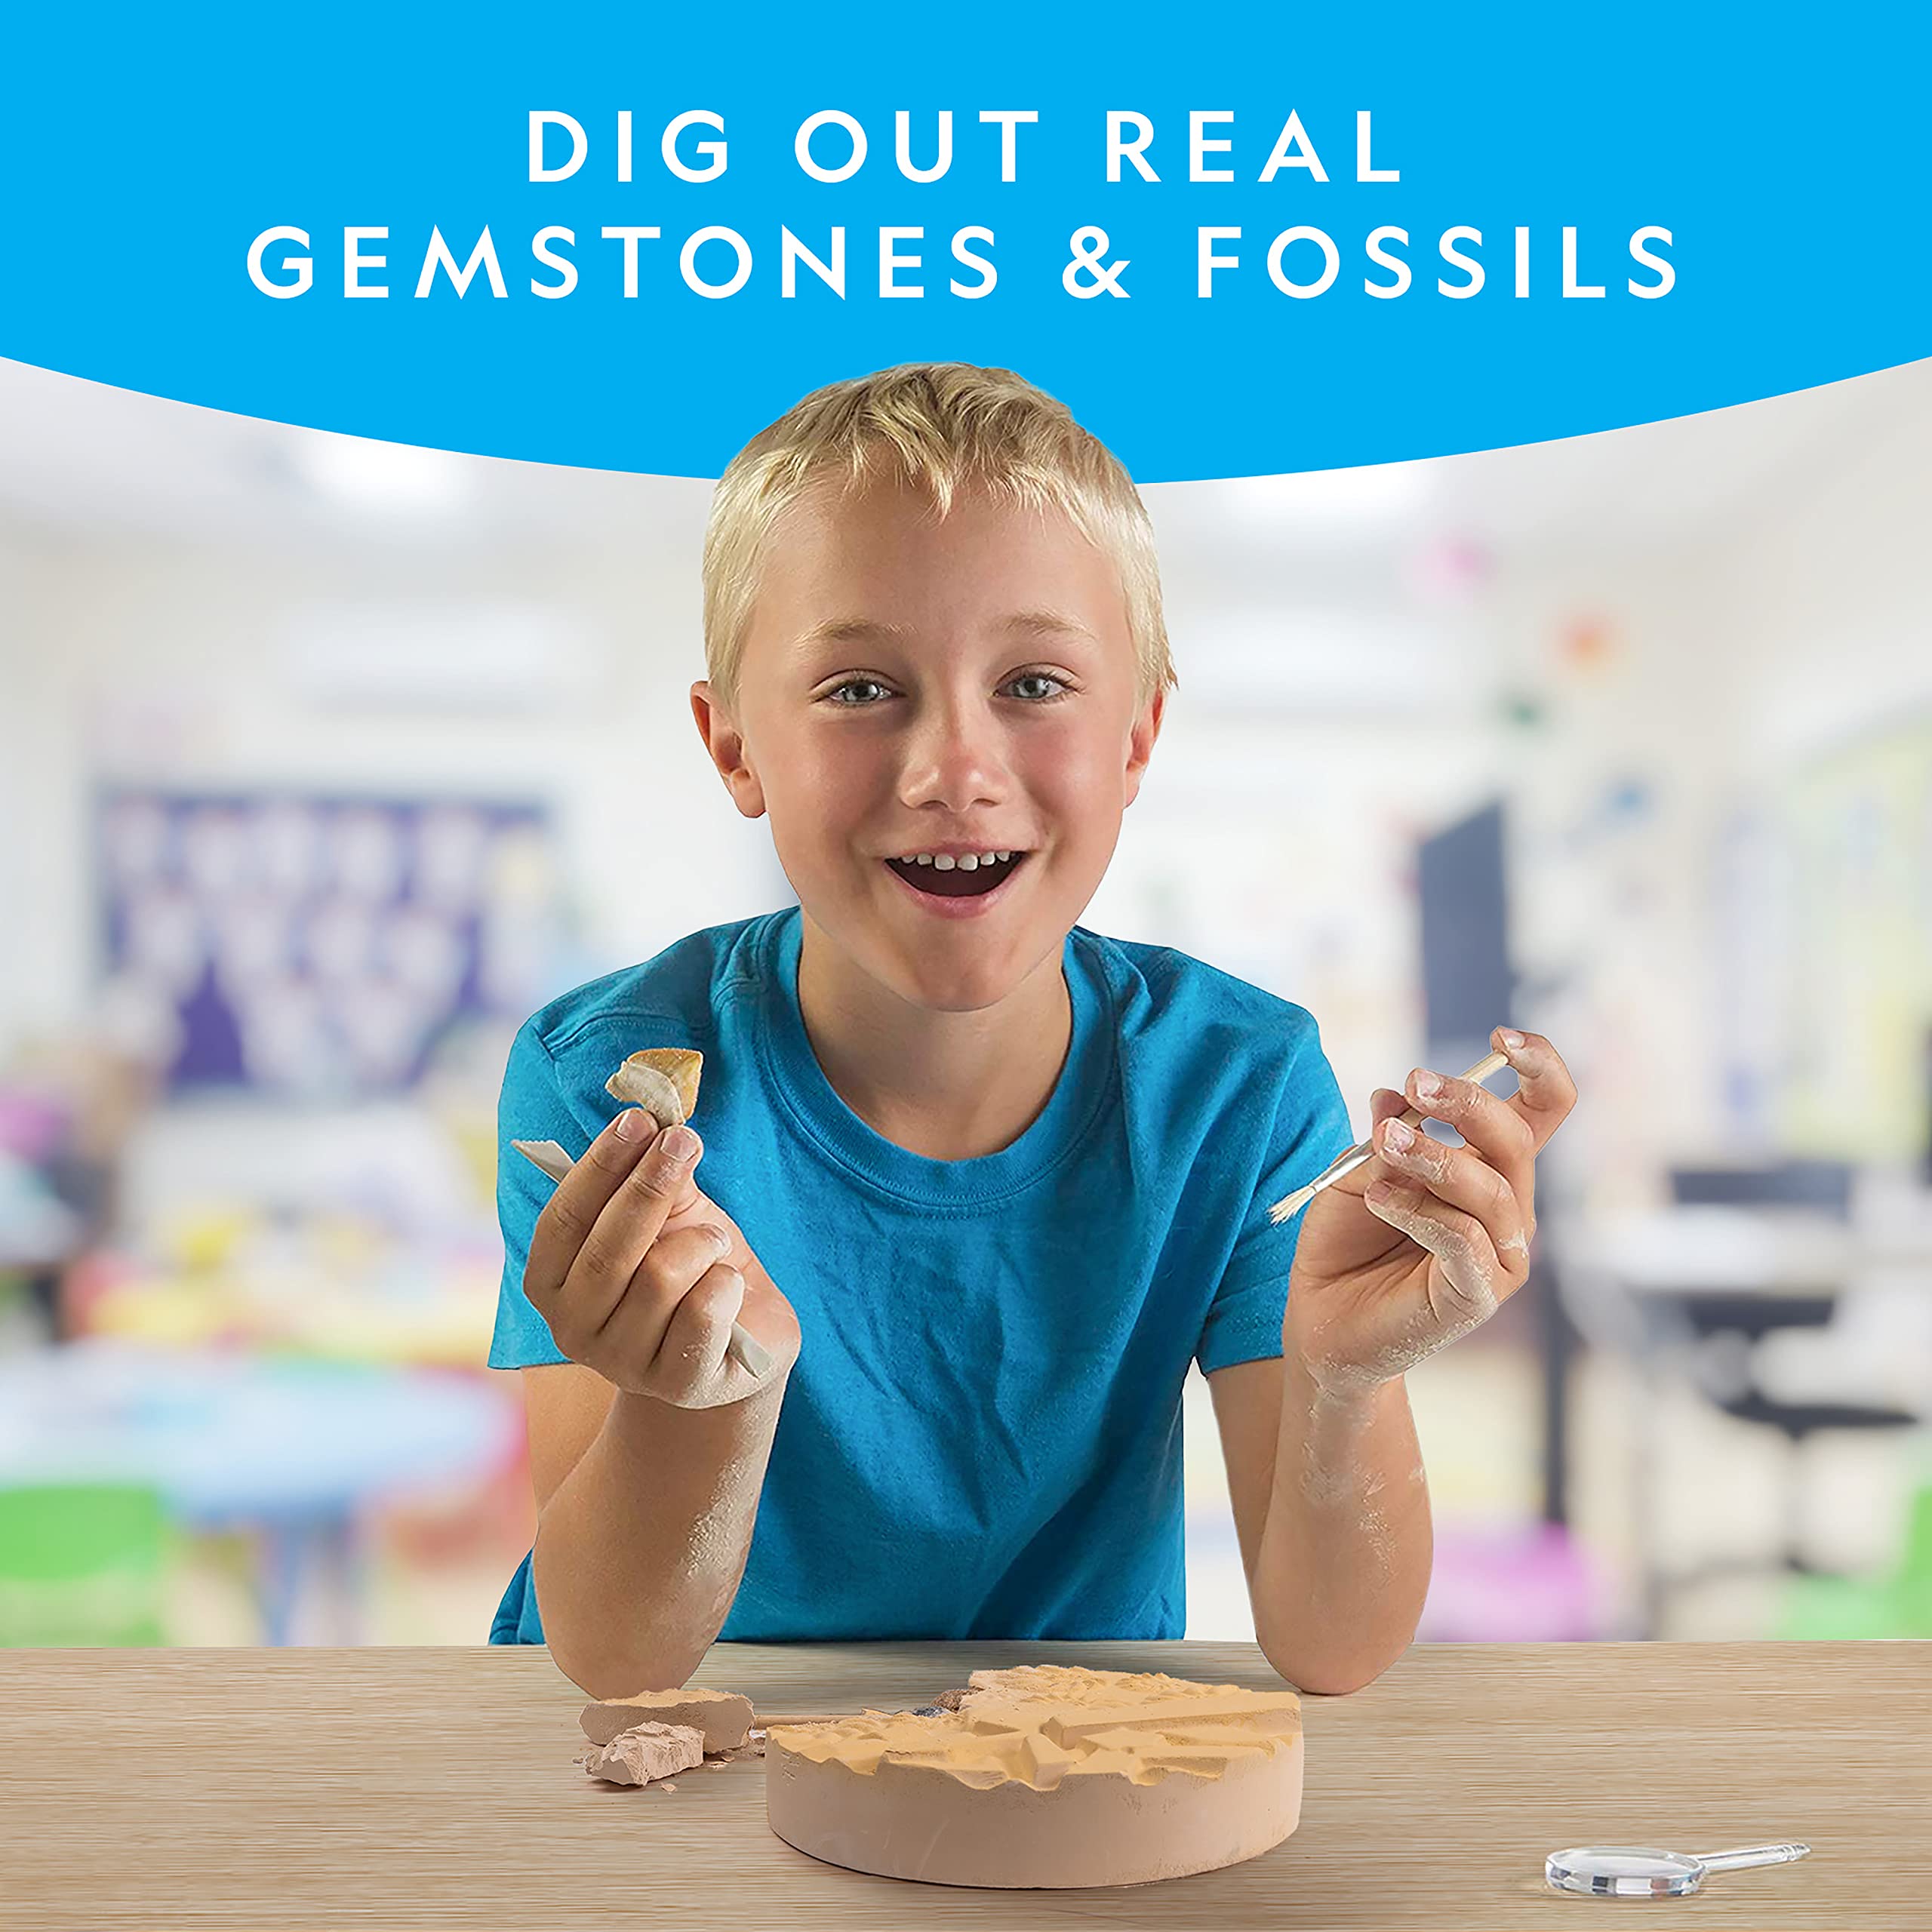 NATIONAL GEOGRAPHIC Mega Fossil and Gemstone Dig Kit - Excavate 20 Real Fossils and Gems, Science Kit for Kids, Rock Digging Excavation Kit, Geology Gifts for Boys and Girls (Amazon Exclusive)